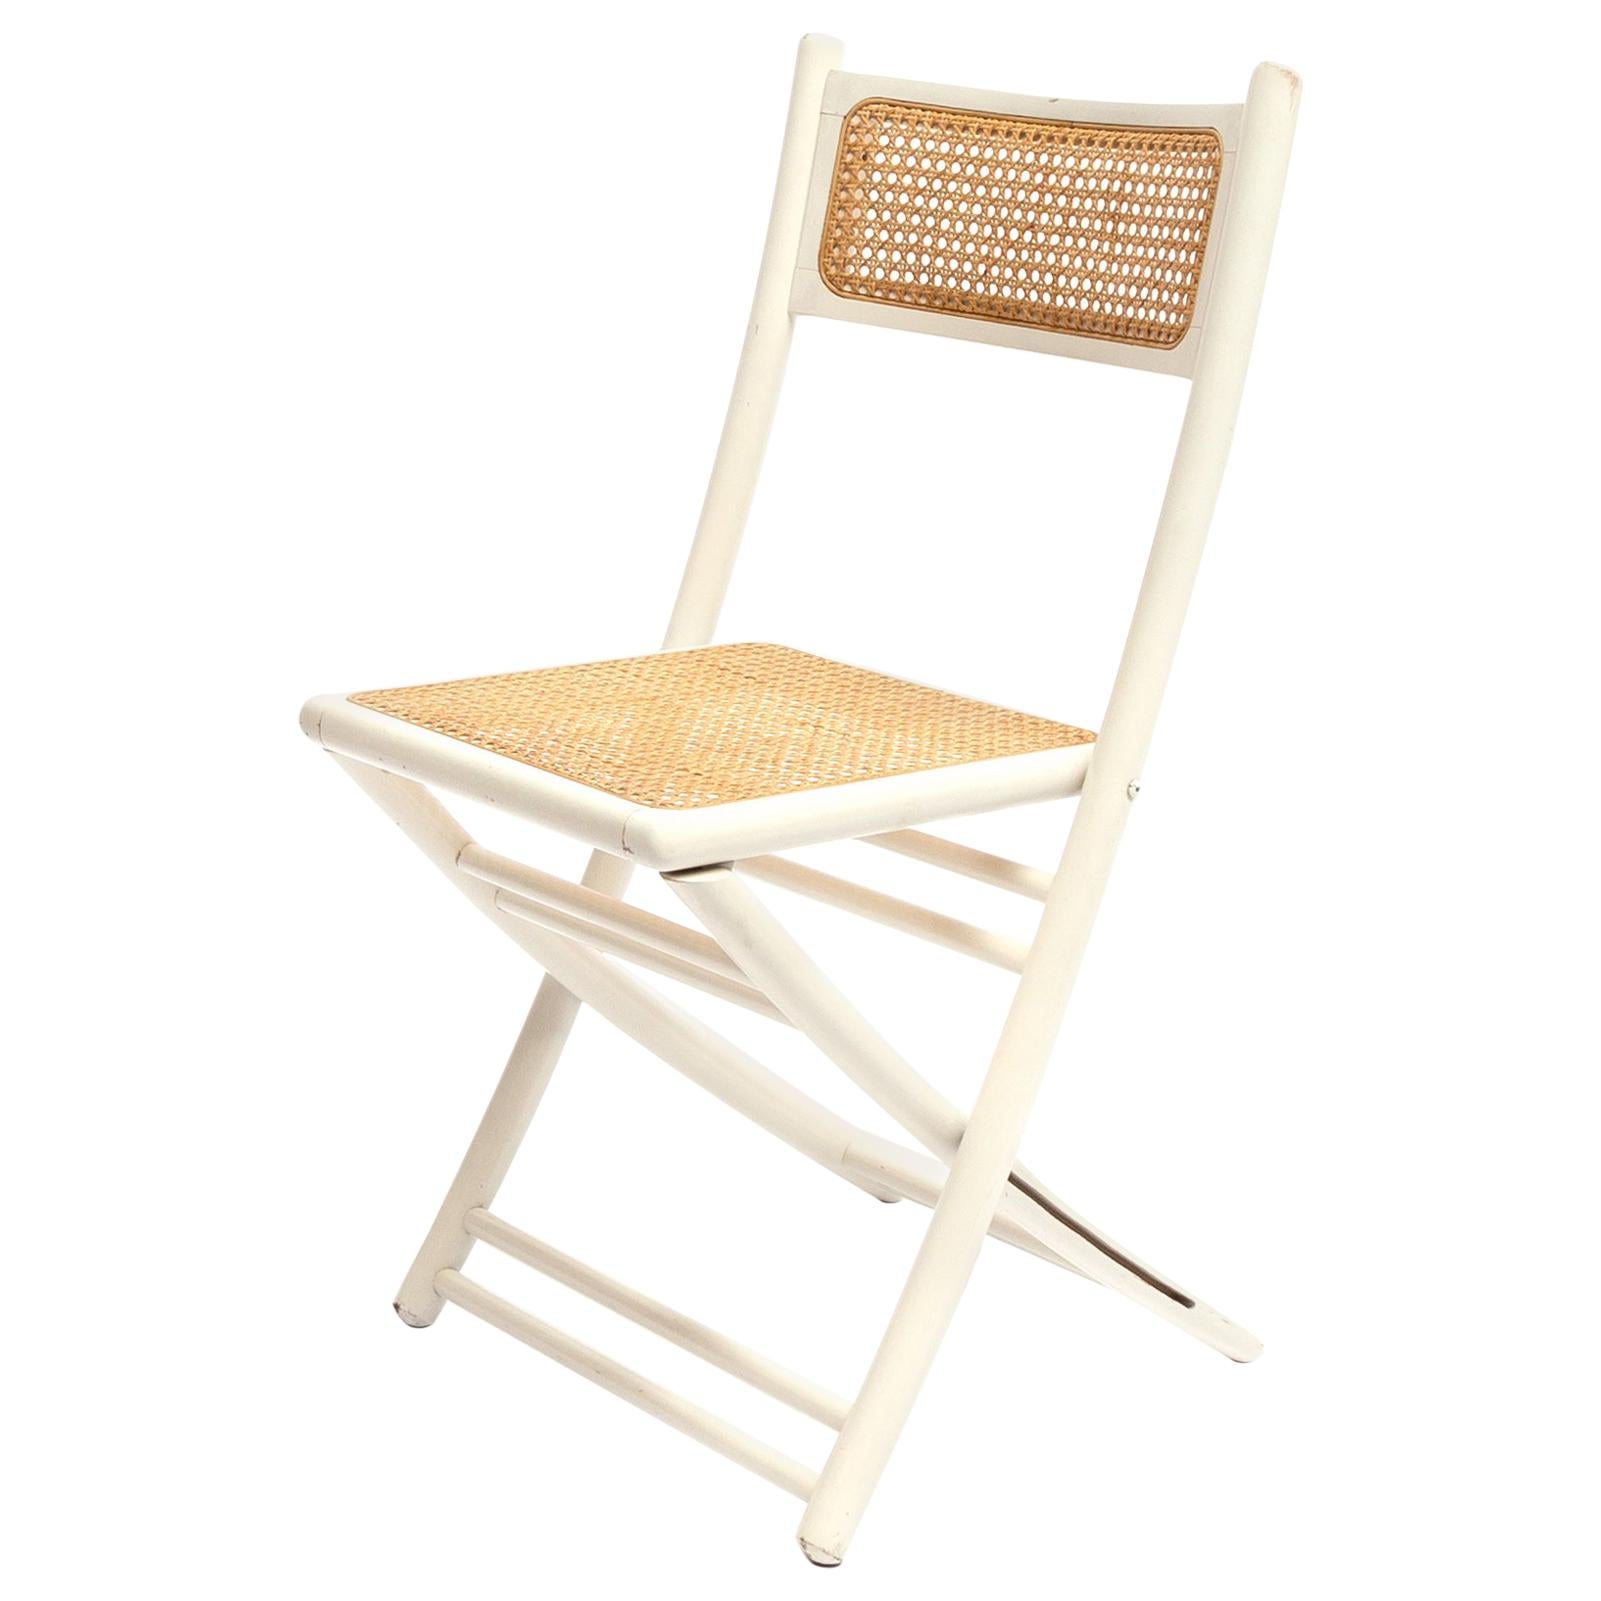 Folding Chair in White Lacquered Wood with Webbing Seat and Backrest 1960s-1970s